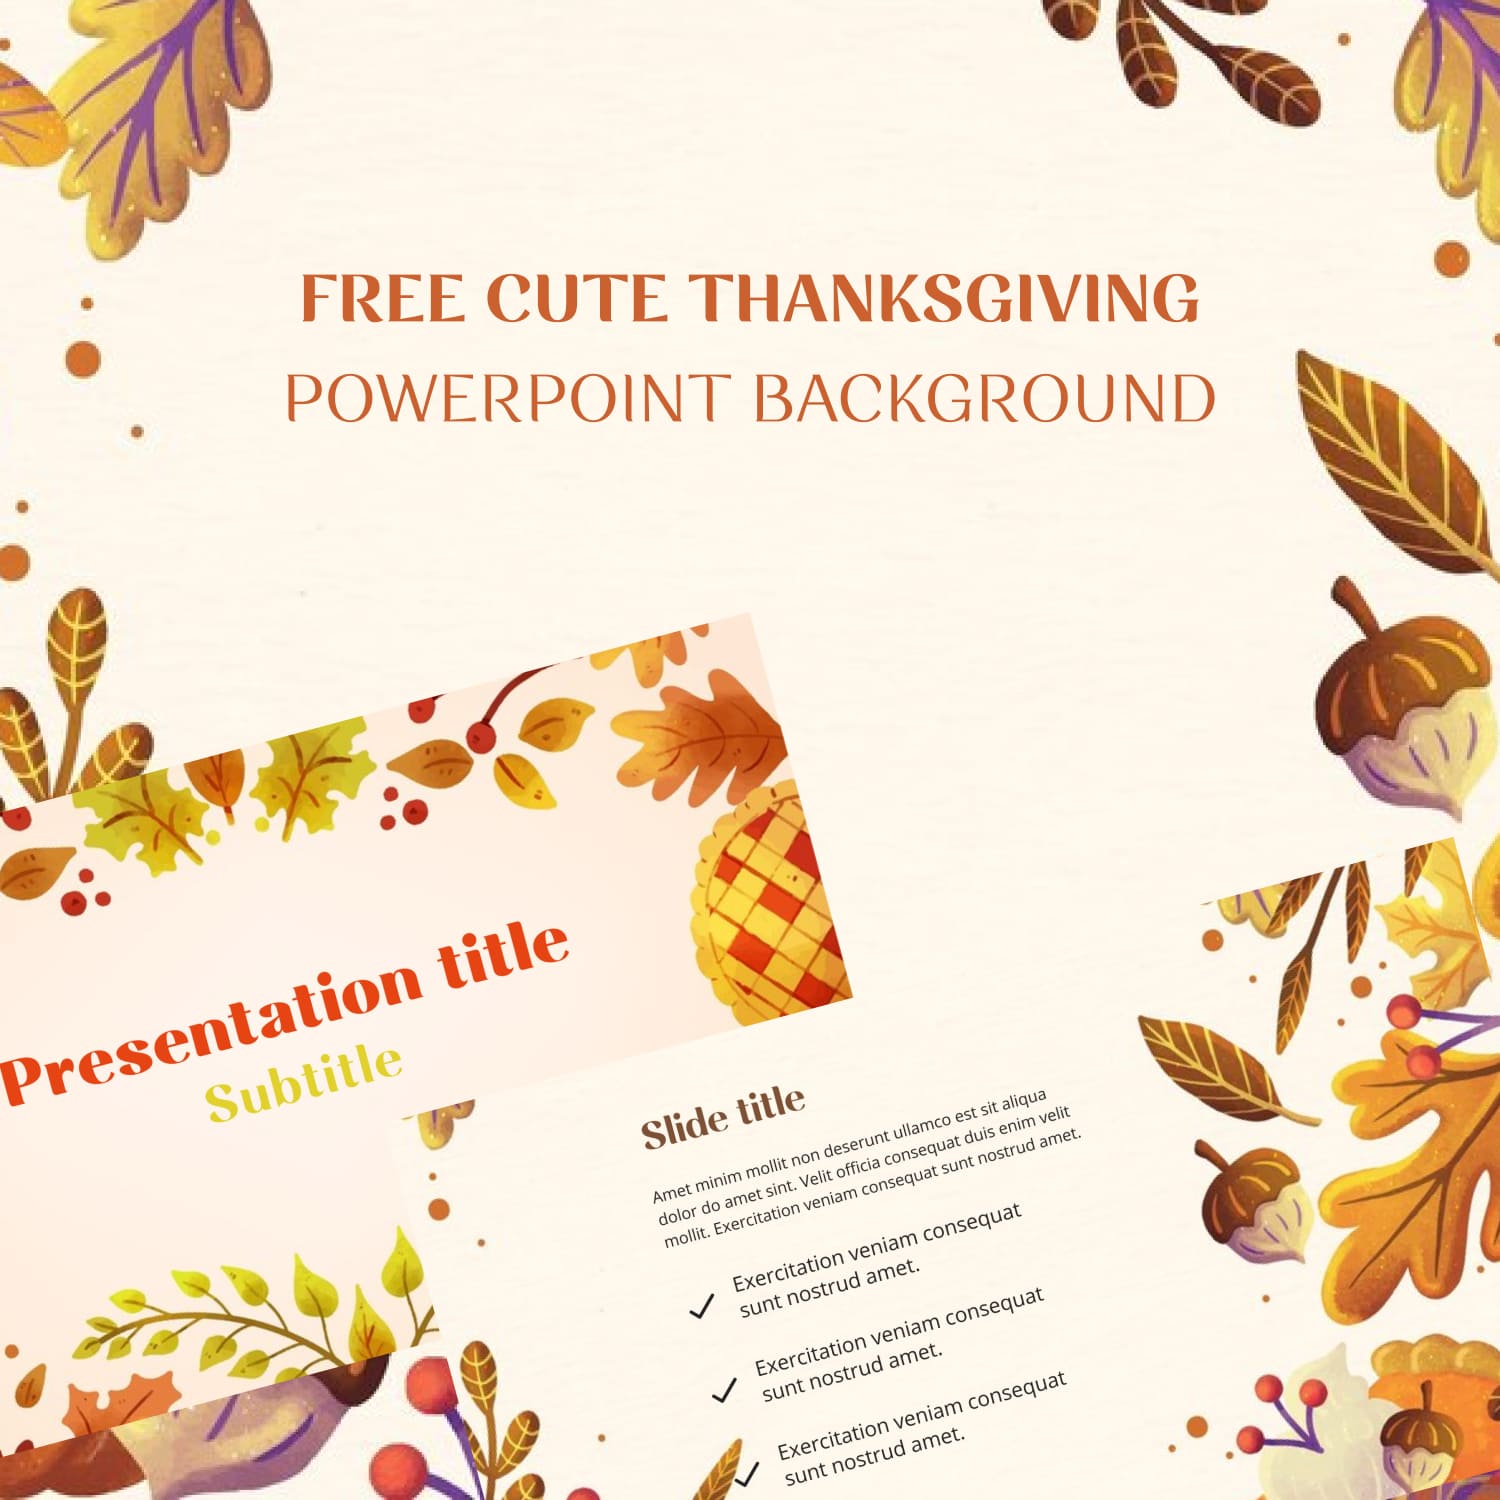 11 Preview Free Cute Thanksgiving Powerpoint Background 1500x1500 1.